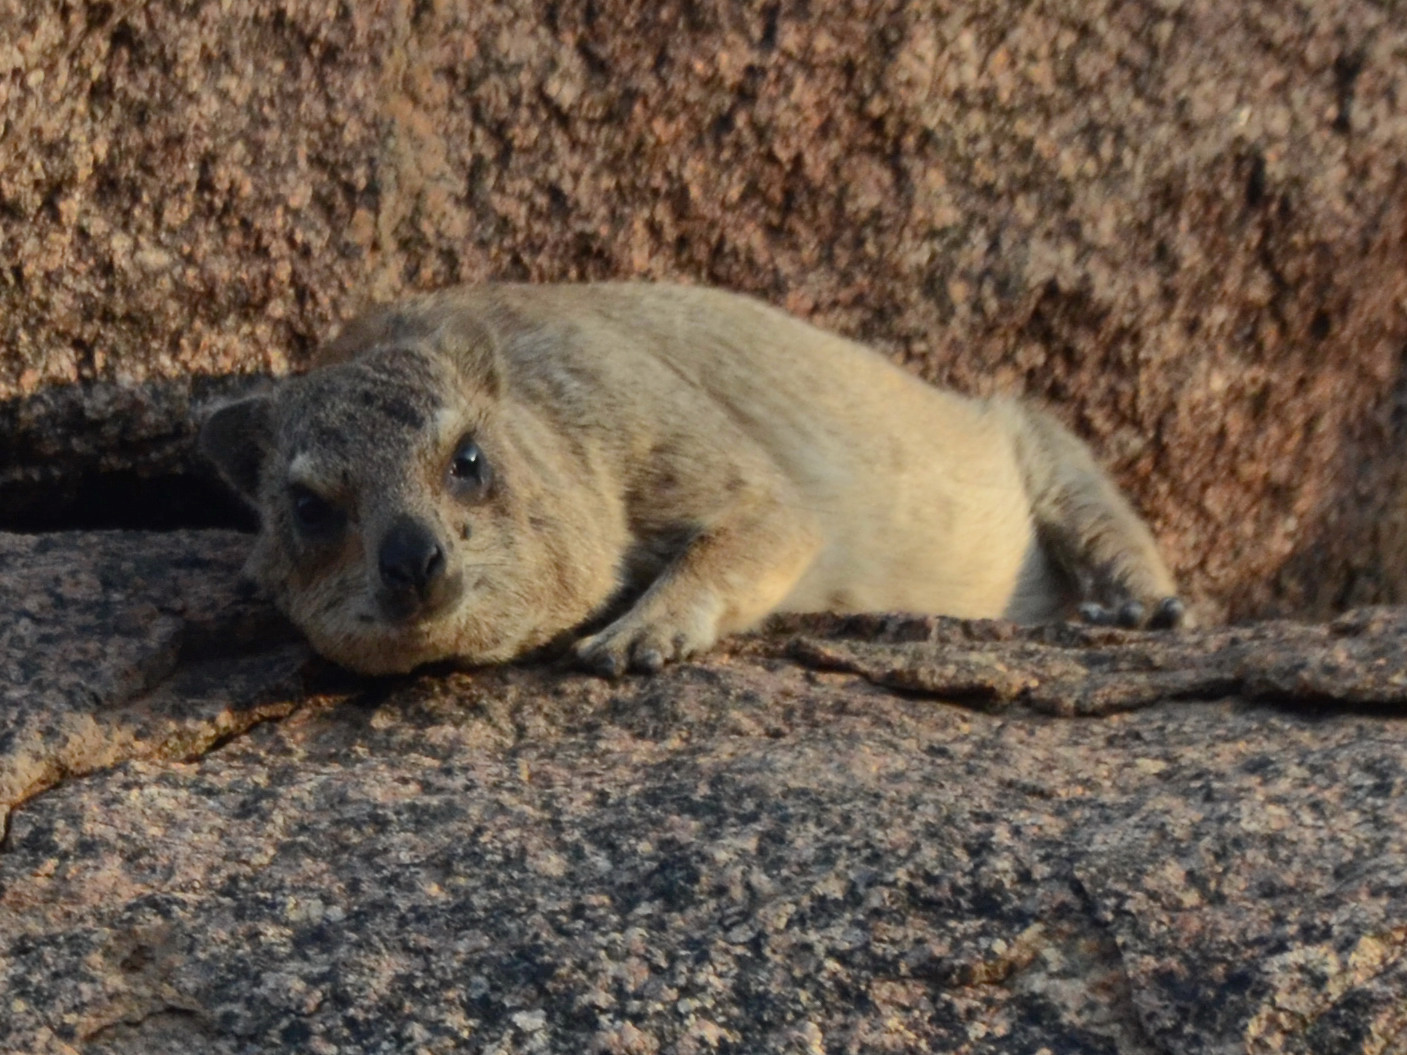 Click picture to see more of the Cape Rock Hyrax (Dassie).